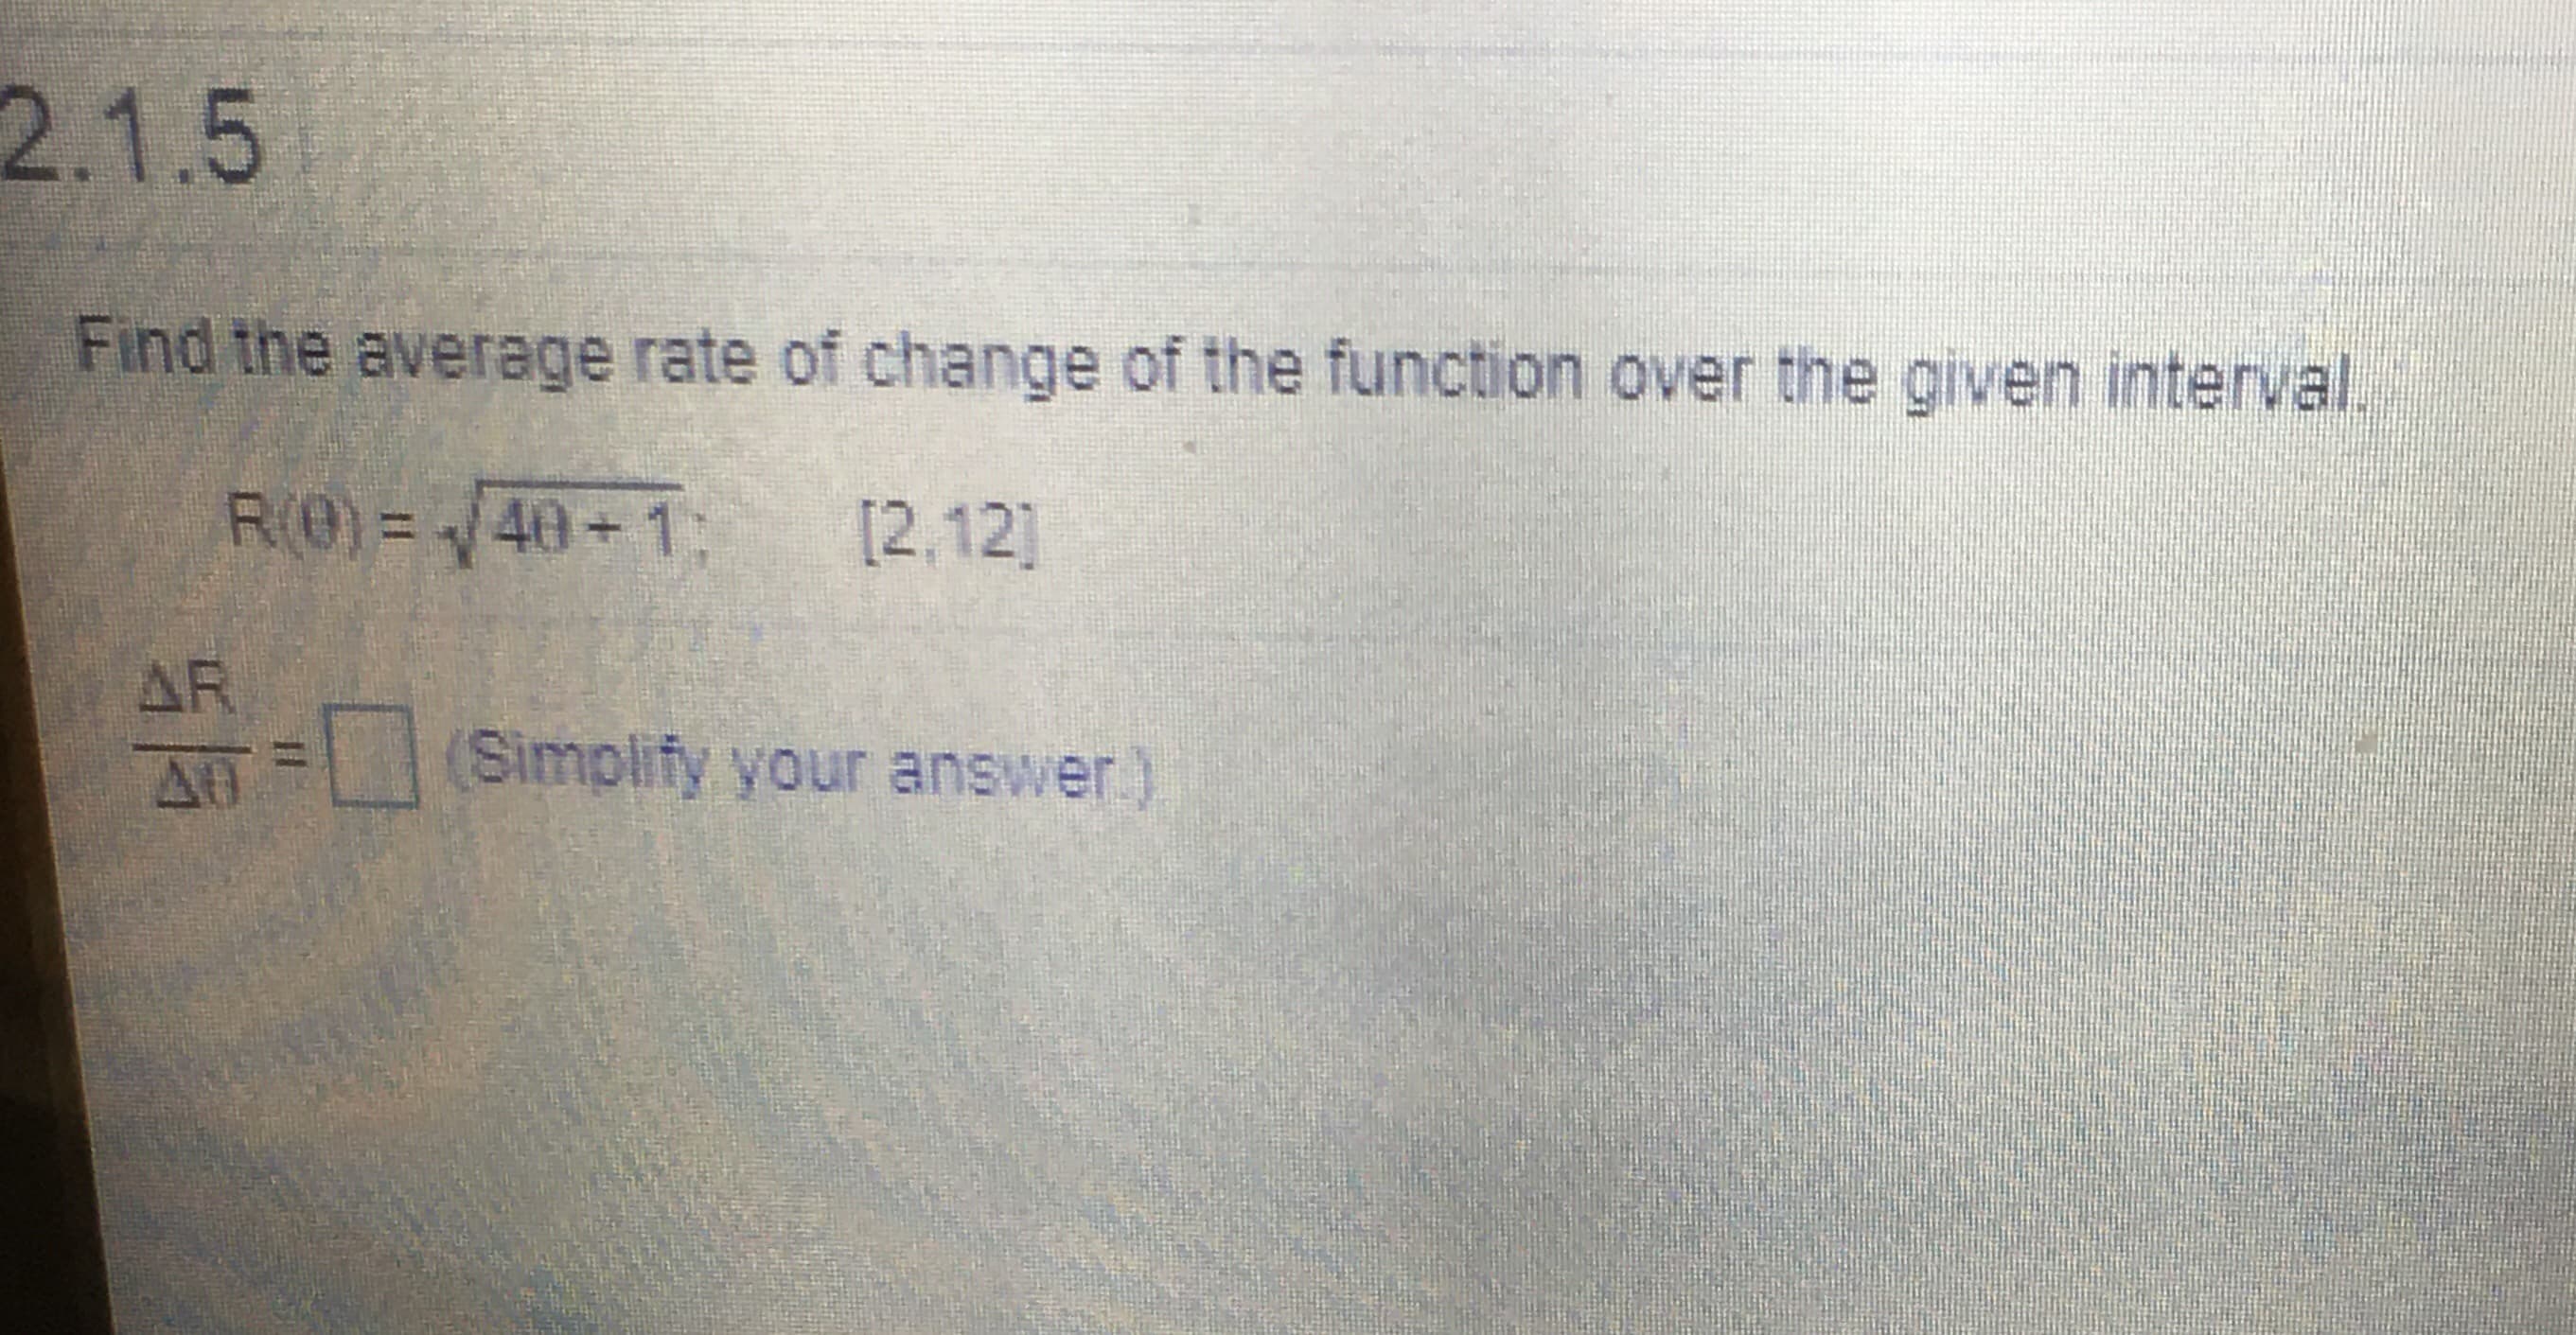 2.1.5
Find the average rate of change of the function over the given interval.
R(0) = /40+1:
[2,12]
AR
(Simplify your answer)
